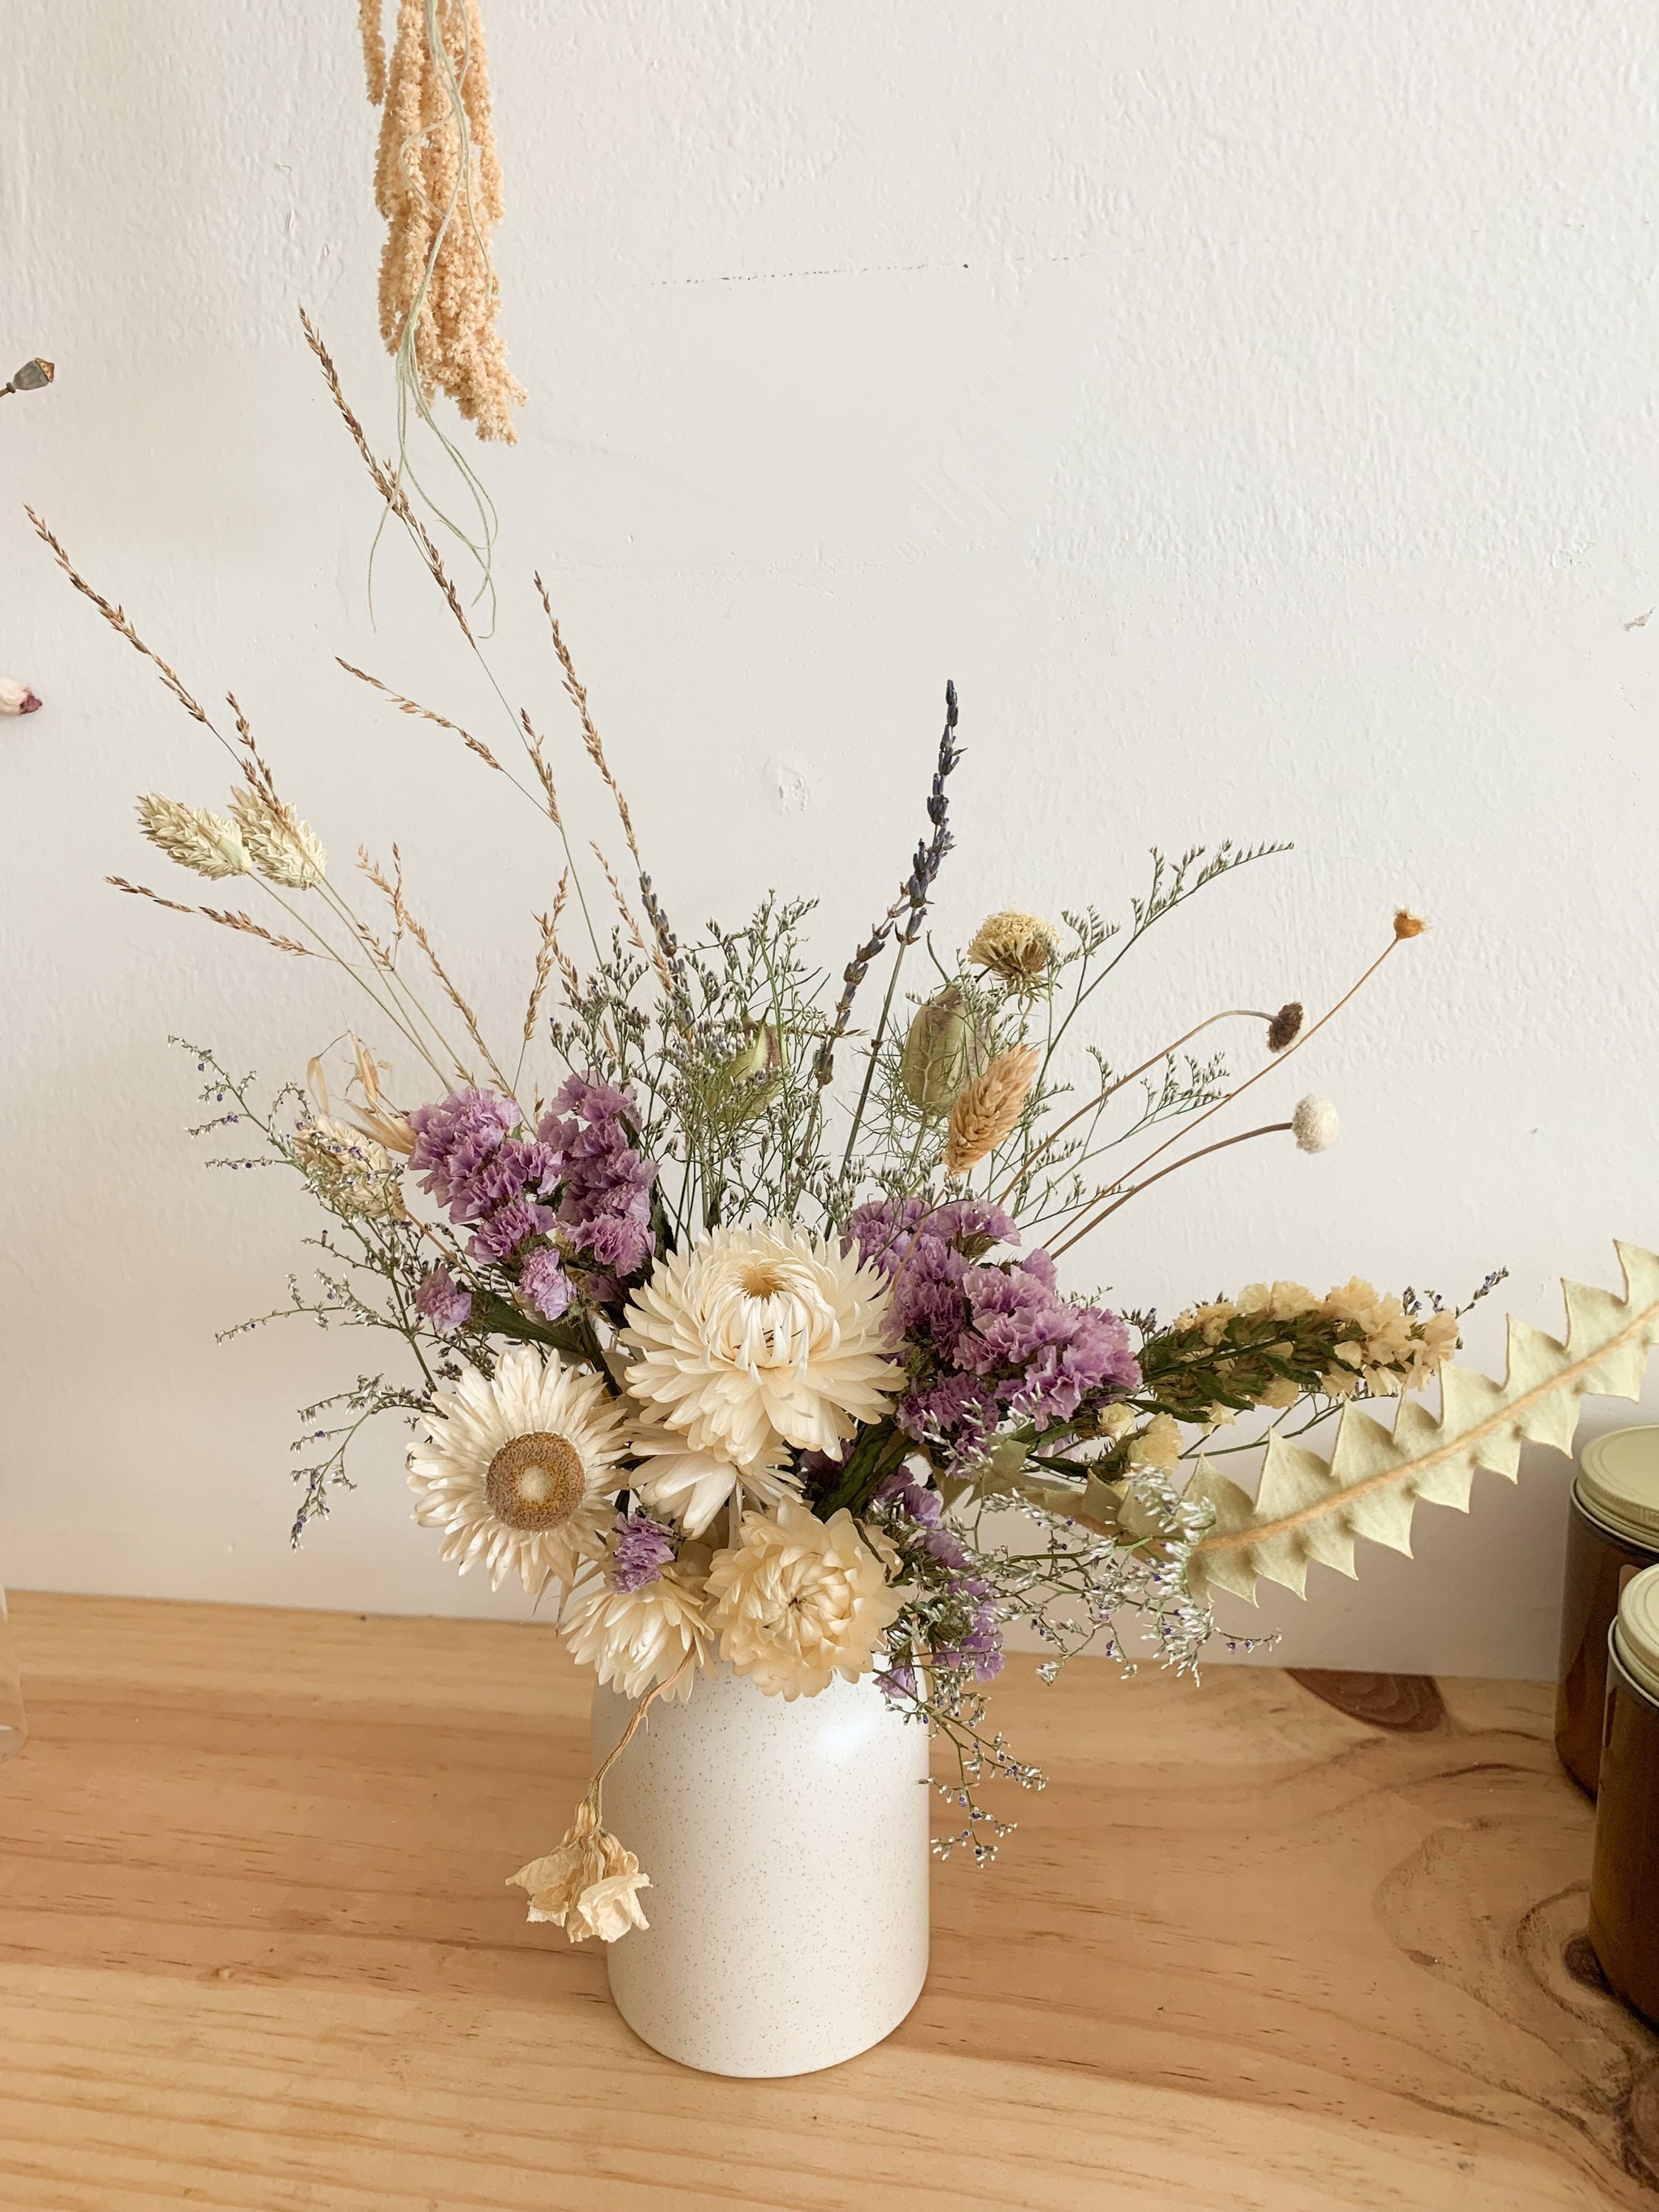 White Vase with Lavander on Mirror and Stoun Wall Background. Colorful  Summer Bouquet of Purple Lavender and Dried Flowers Stock Photo - Image of  decor, board: 265439790